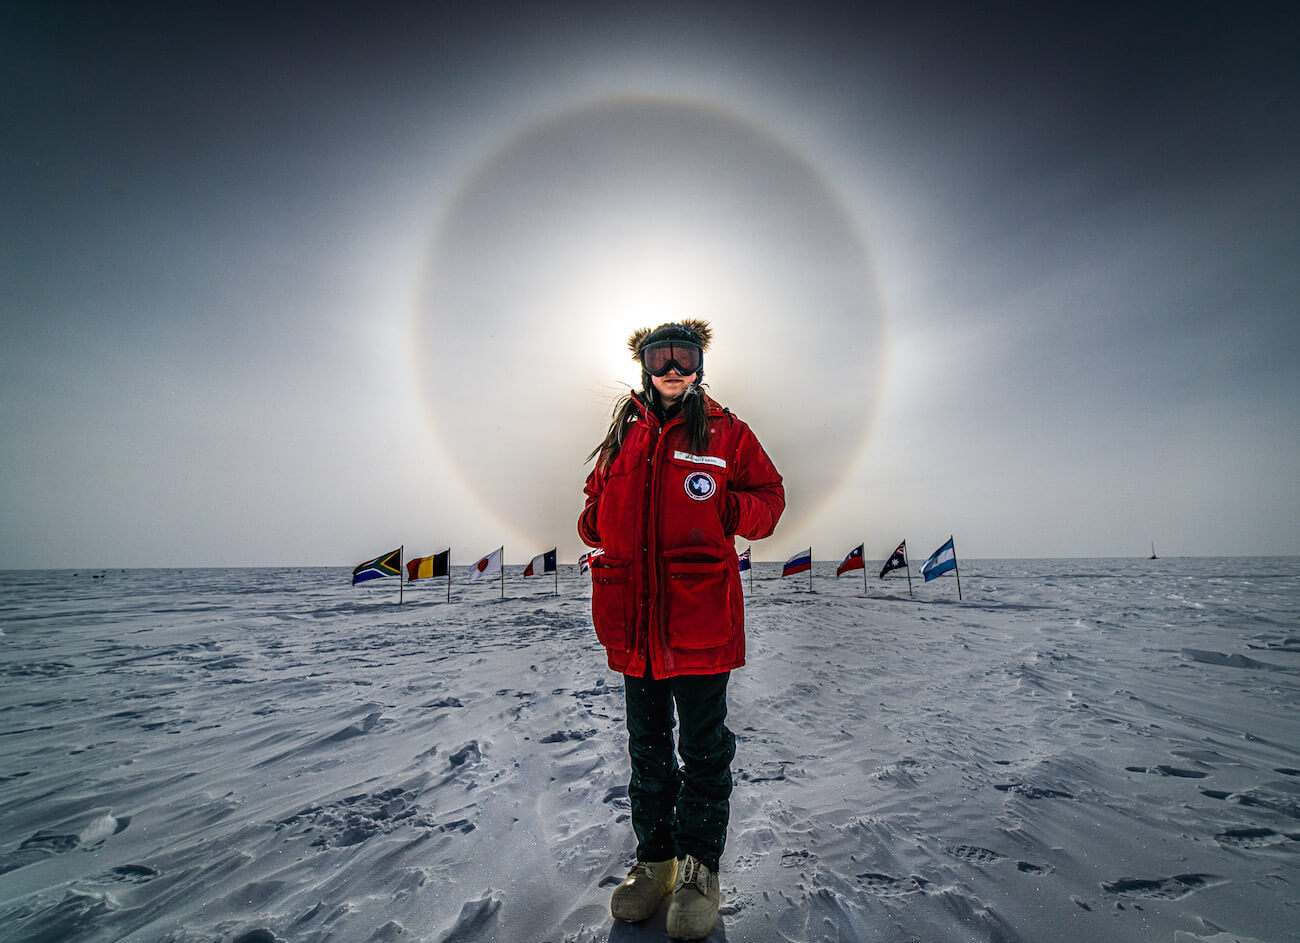 South Pole For a Year: An Adventure on the Edge of the Cold